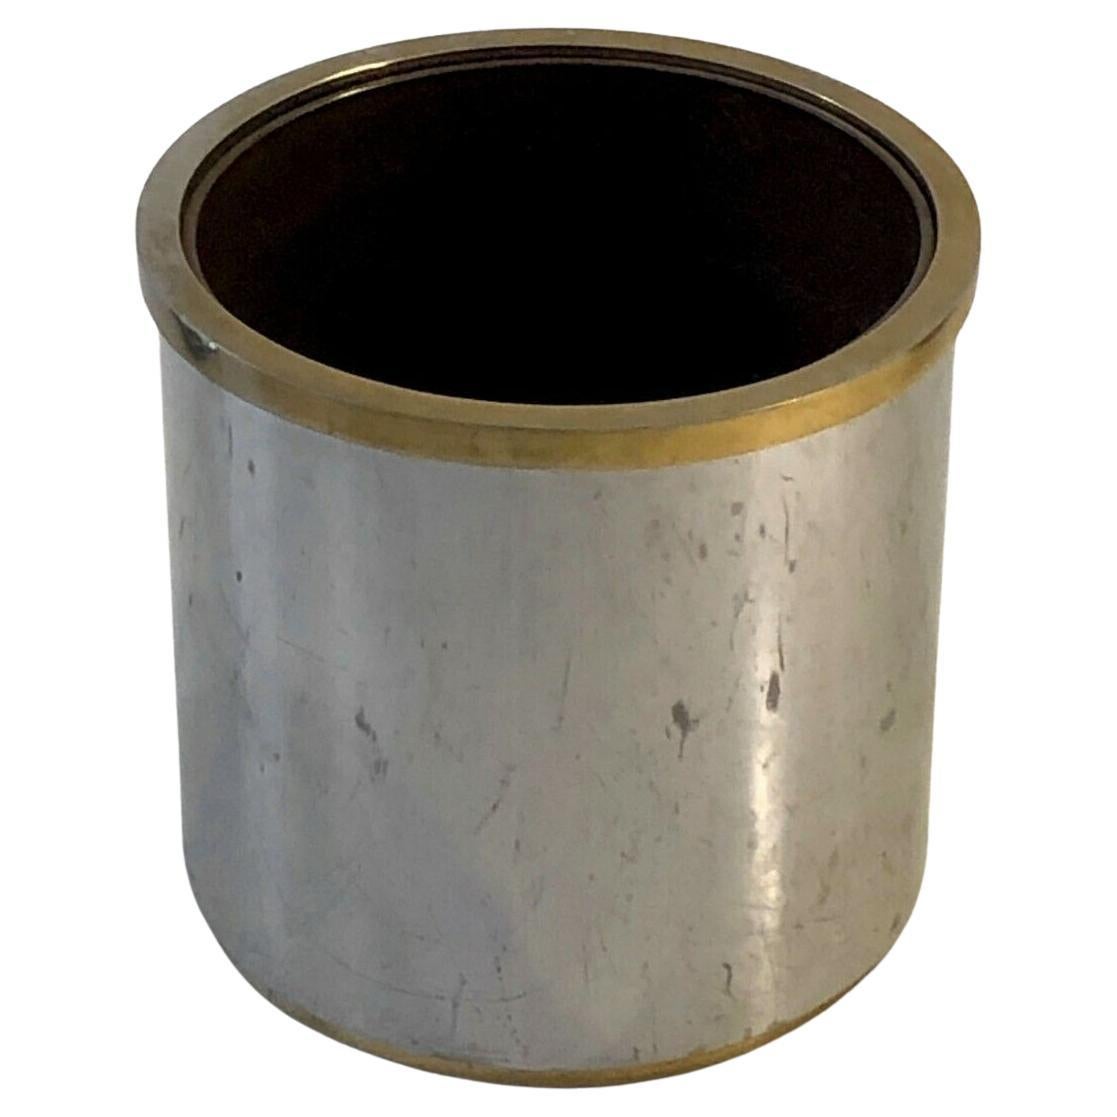 An elegant and generous cylindrical planter with a golden border, Art-Deco, Modernist, Shabby-Chic, in mirror polished steel enhanced with a golden square section border, brown plastic inner pot, Jansen edition, France 1970-1980.

DIMENSIONS: H 39.5